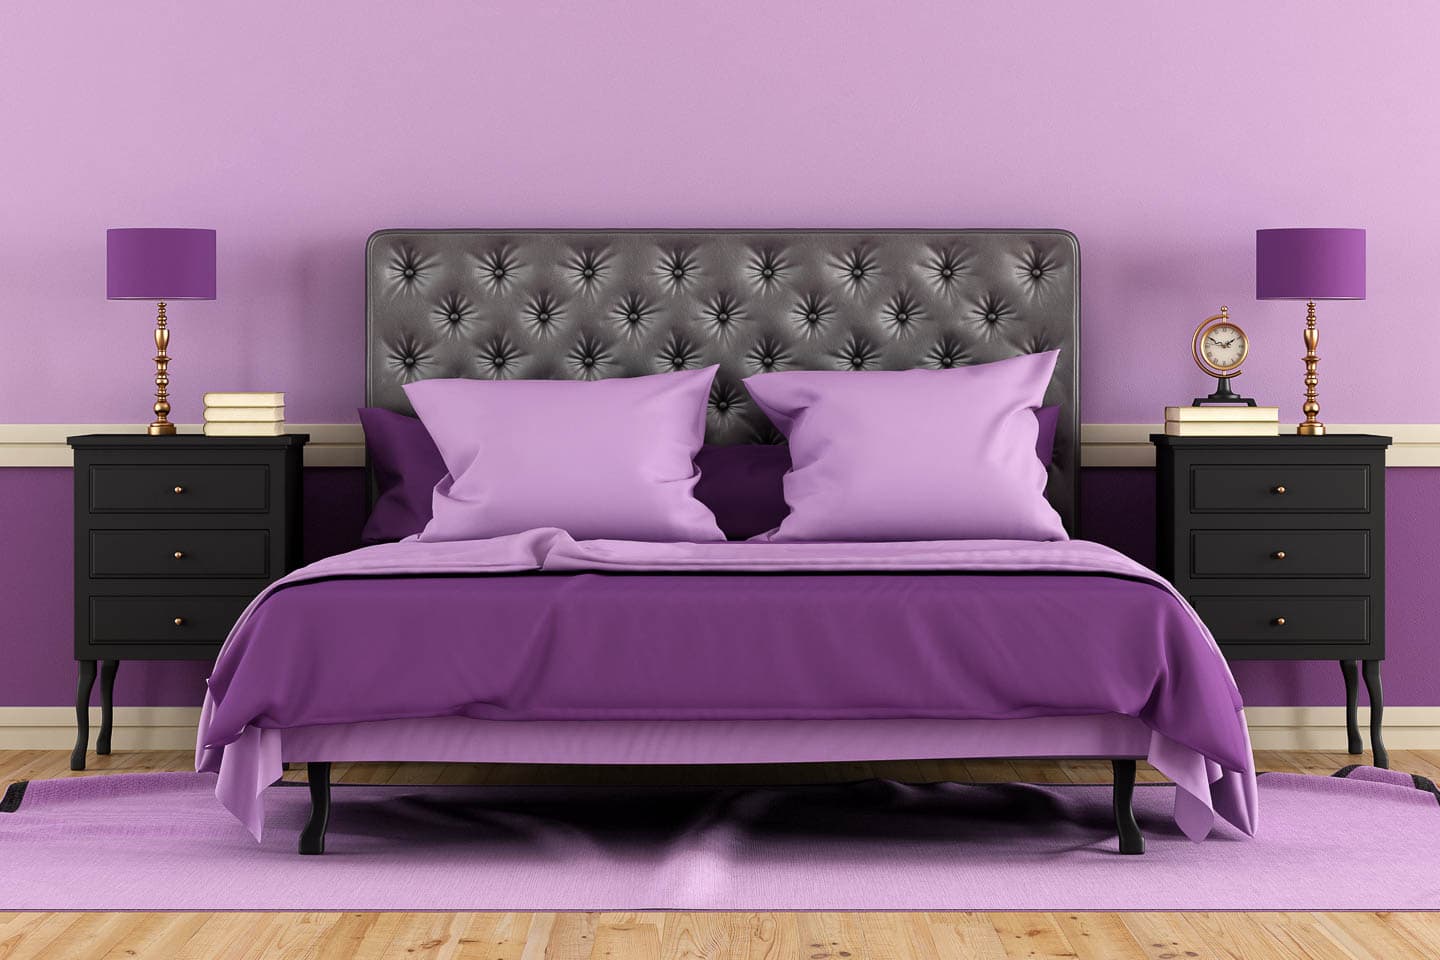 purple bed in a bedroom with the top half of the walls painted light purple and bottom half painted dark purple